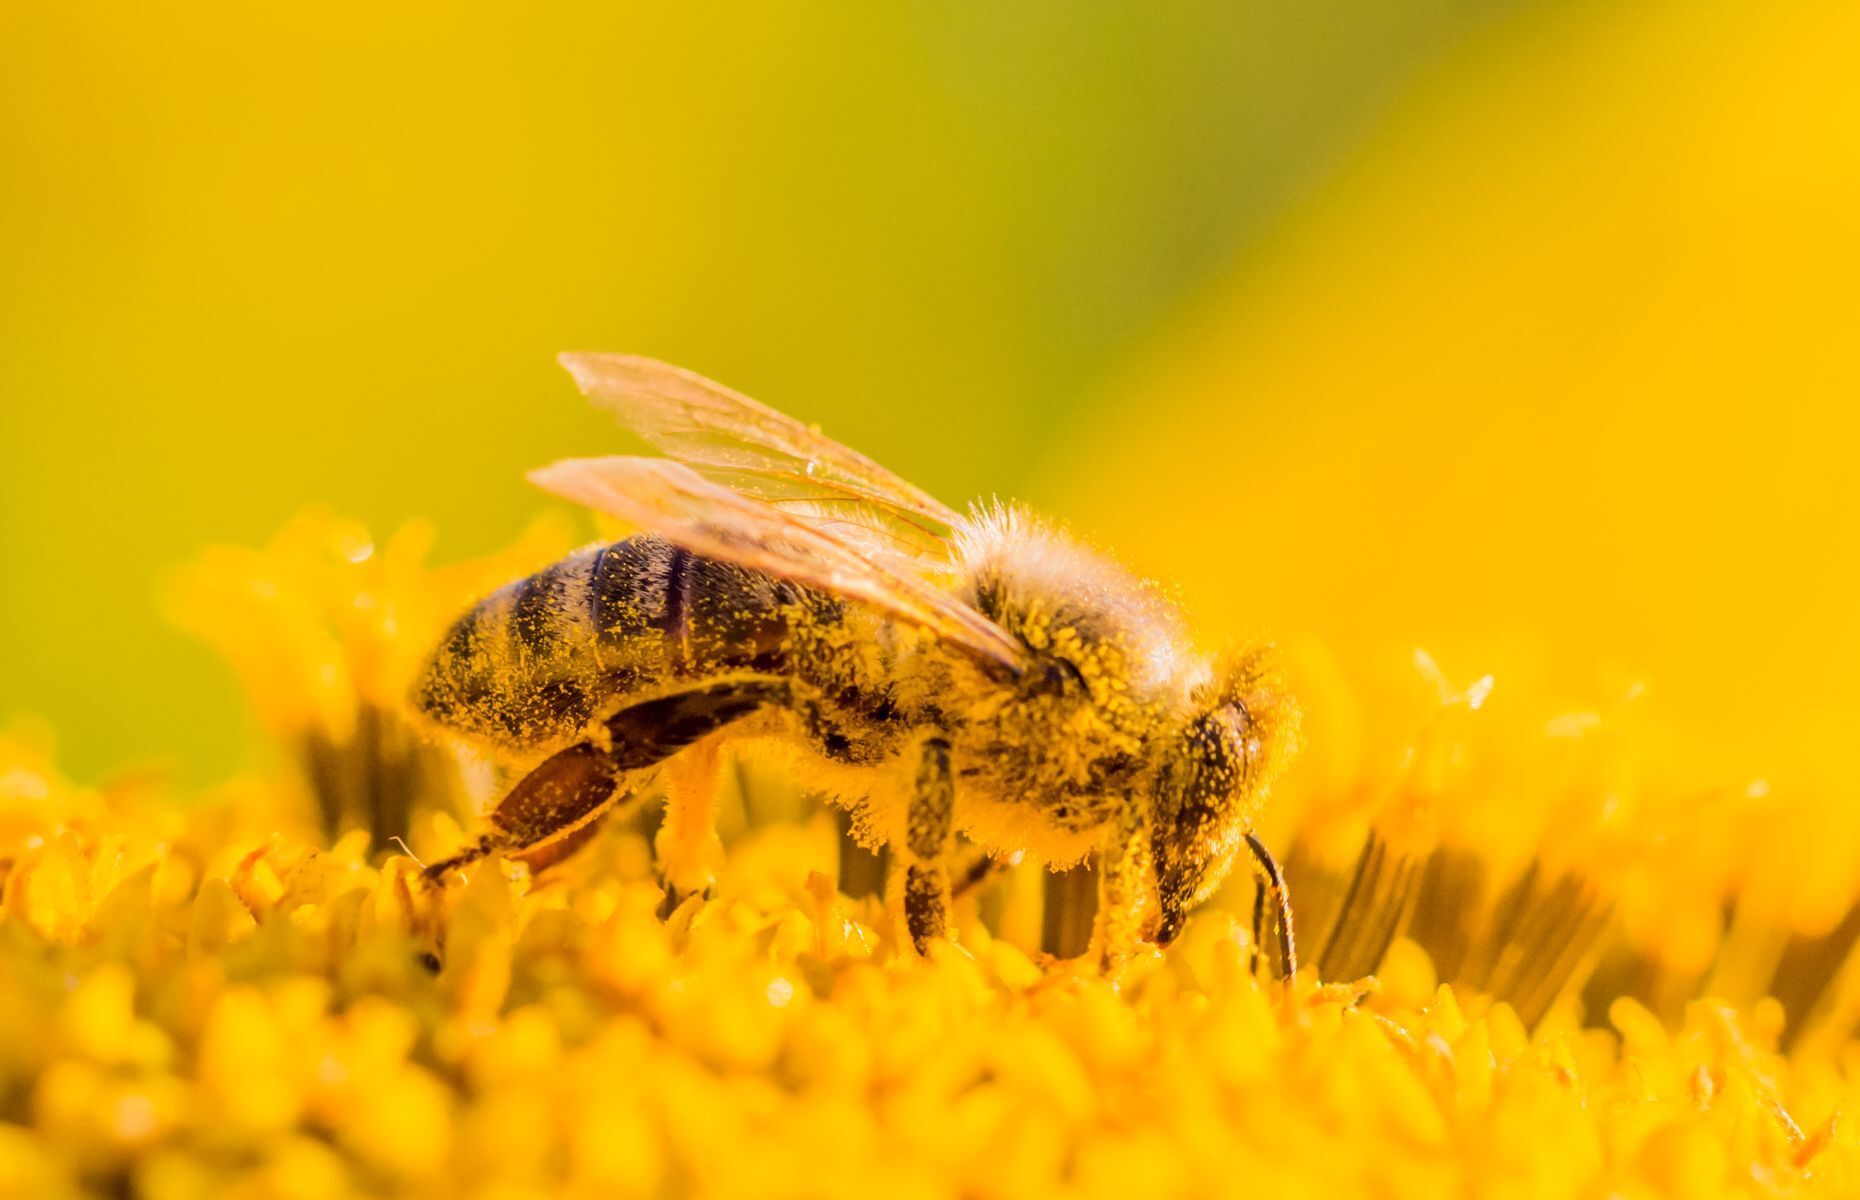 Some 75% of the world's <a href="https://www.unep.org/news-and-stories/story/why-bees-are-essential-people-and-planet" rel="noreferrer noopener">food crops</a> depend on bees for pollination. In fact, crop yields have already been affected by a lack of pollinating insects, which may have serious repercussions on our <a href="https://www.scientia.global/pollinator-decline-implications-for-food-security-environment/" rel="noreferrer noopener">food security</a>.